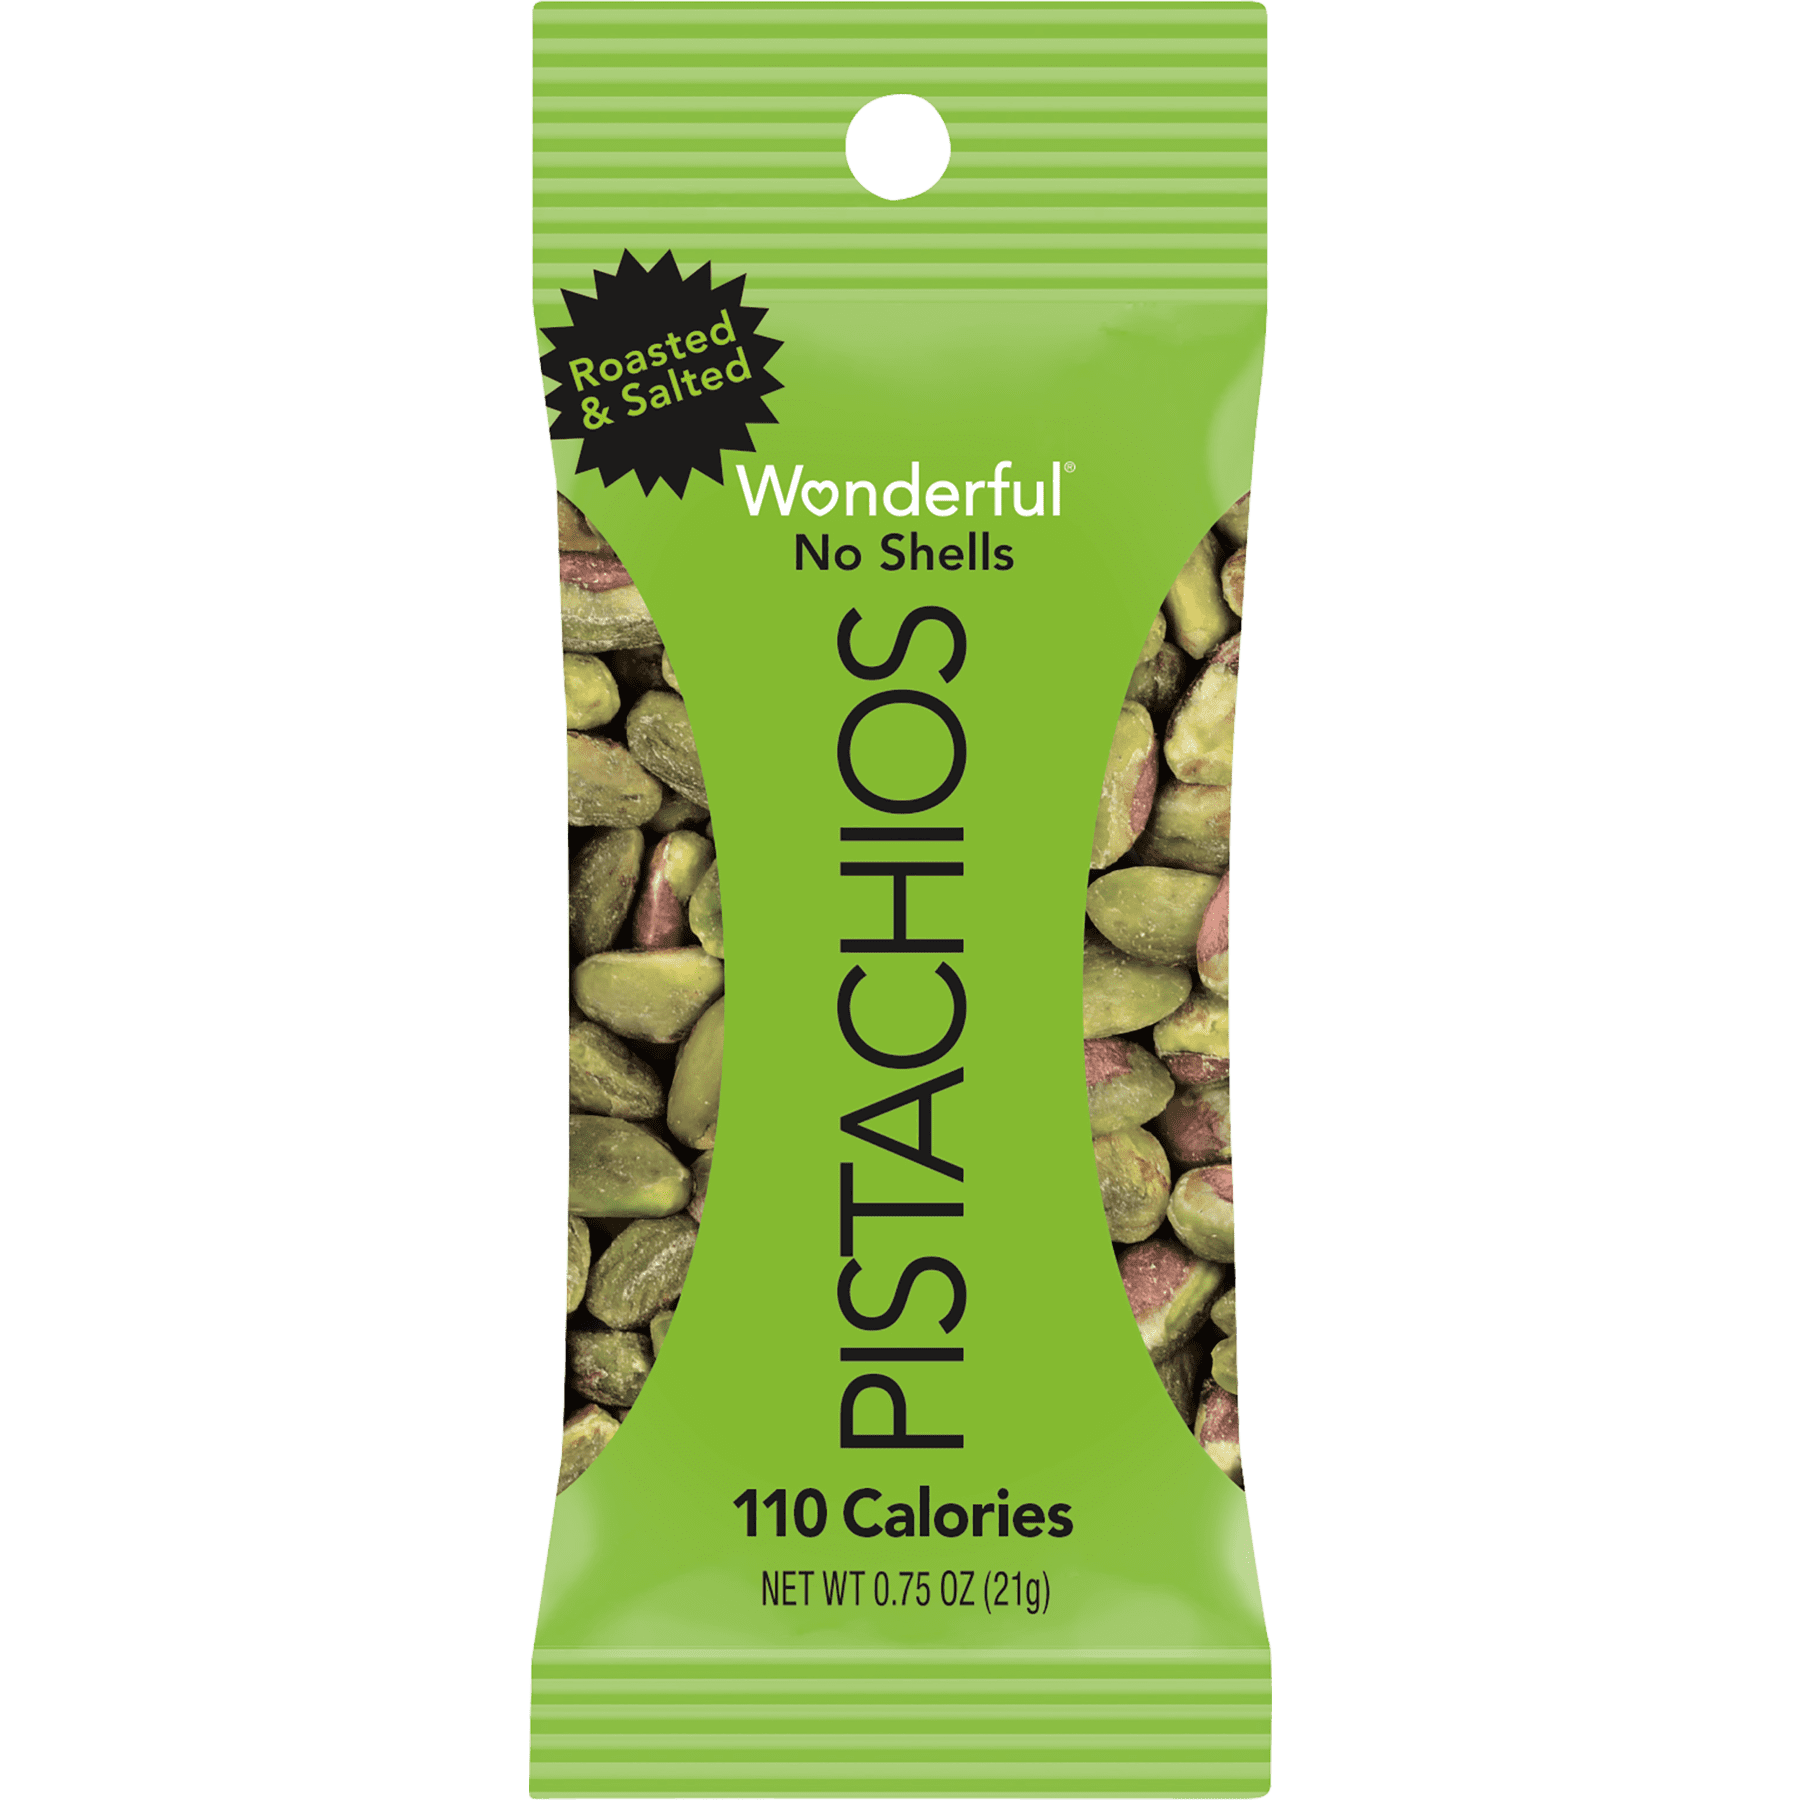 Kirkland Pistachios Roasted & Salted 3 LBS Bag In Shell Natural Opened Nuts  NIP 96619545346 | eBay